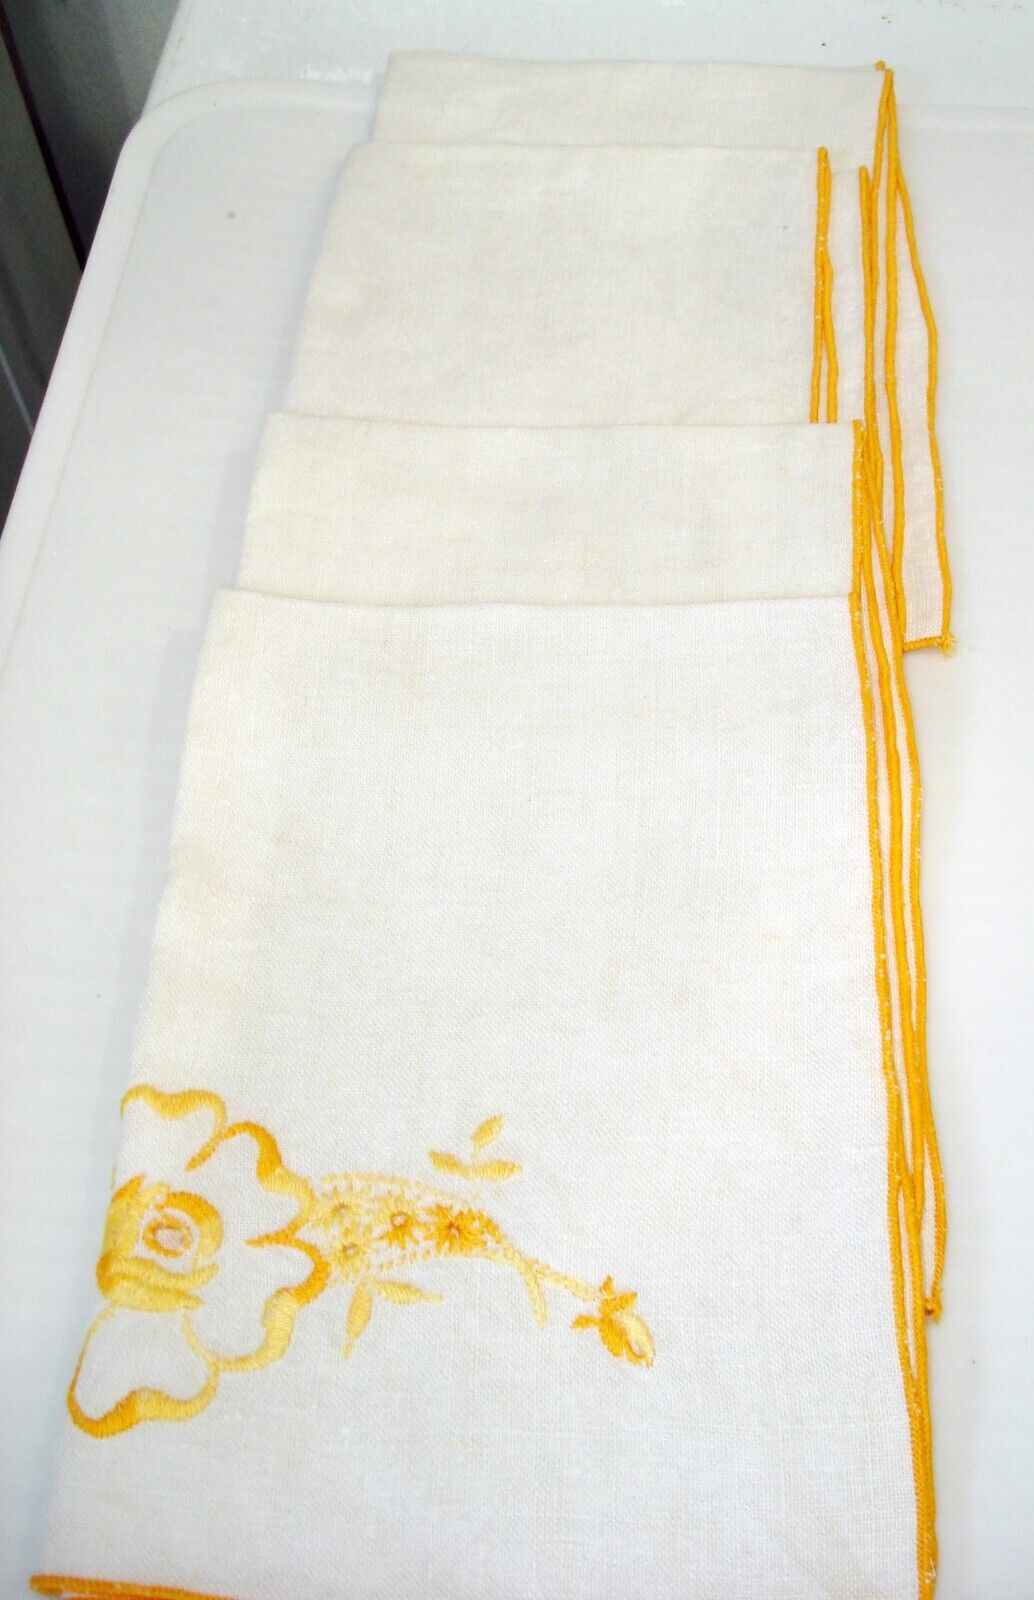 Lot of 7 Vintage White Napkins with Yellow Flowers